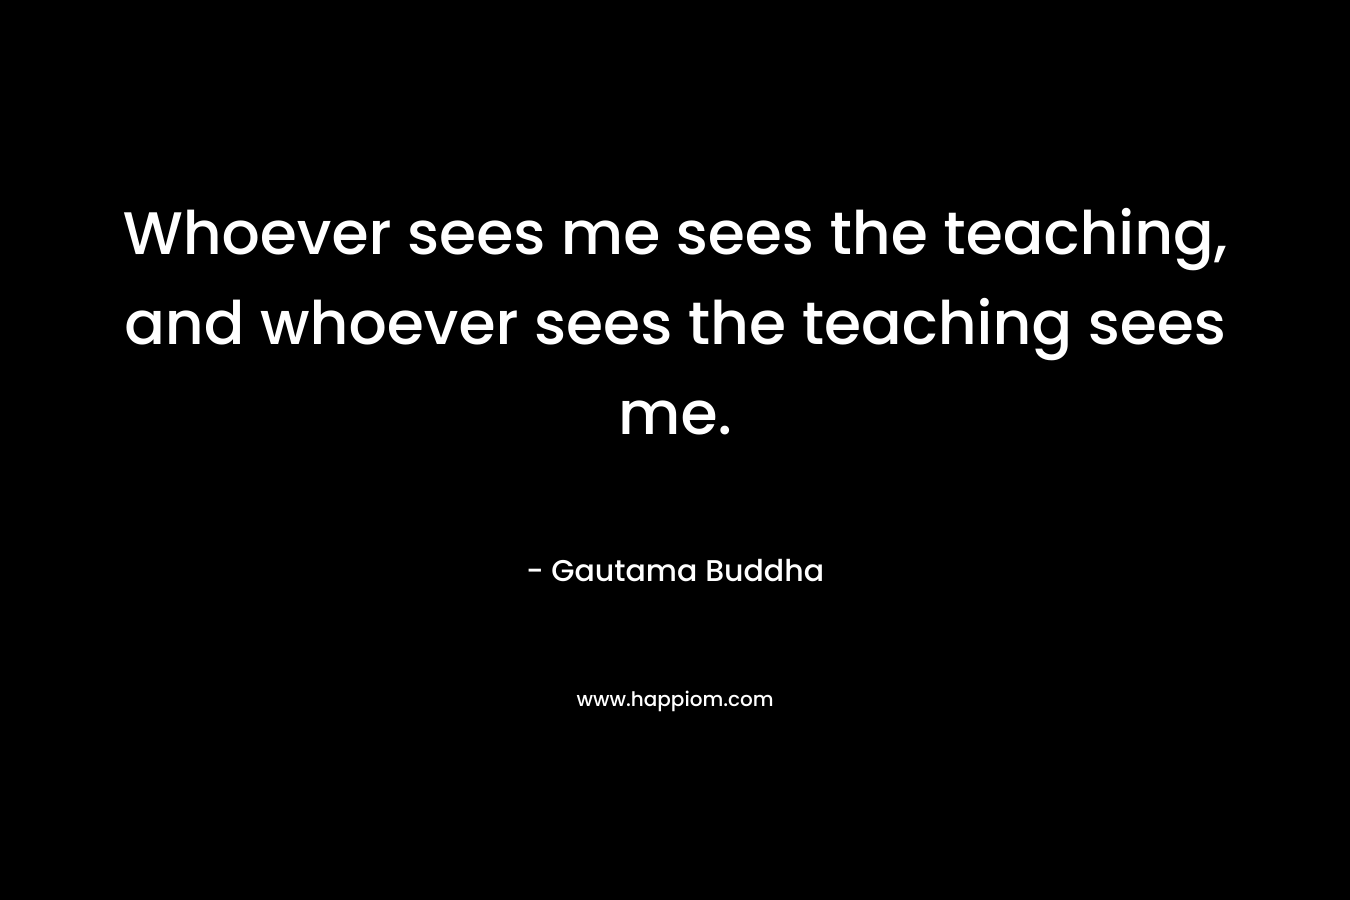 Whoever sees me sees the teaching, and whoever sees the teaching sees me. – Gautama Buddha